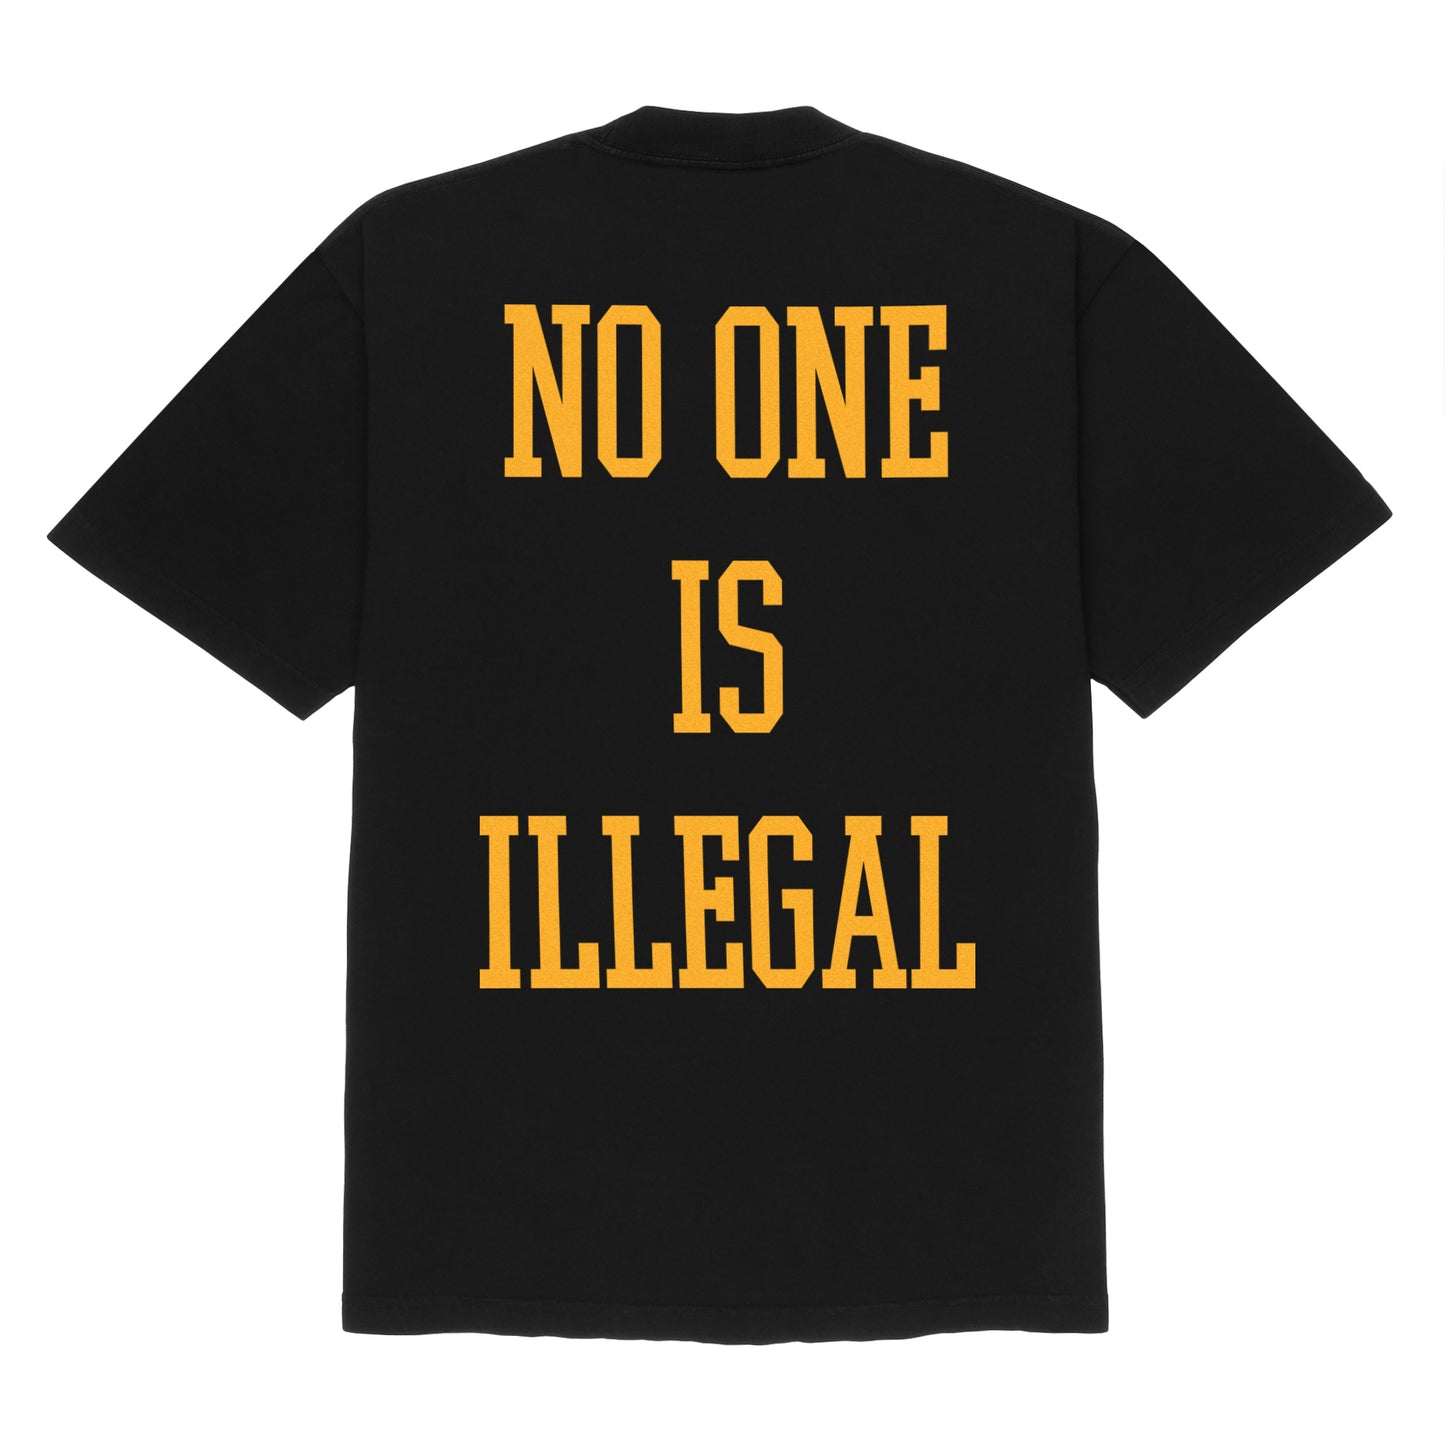 No One Is Illegal T-Shirt (Black)